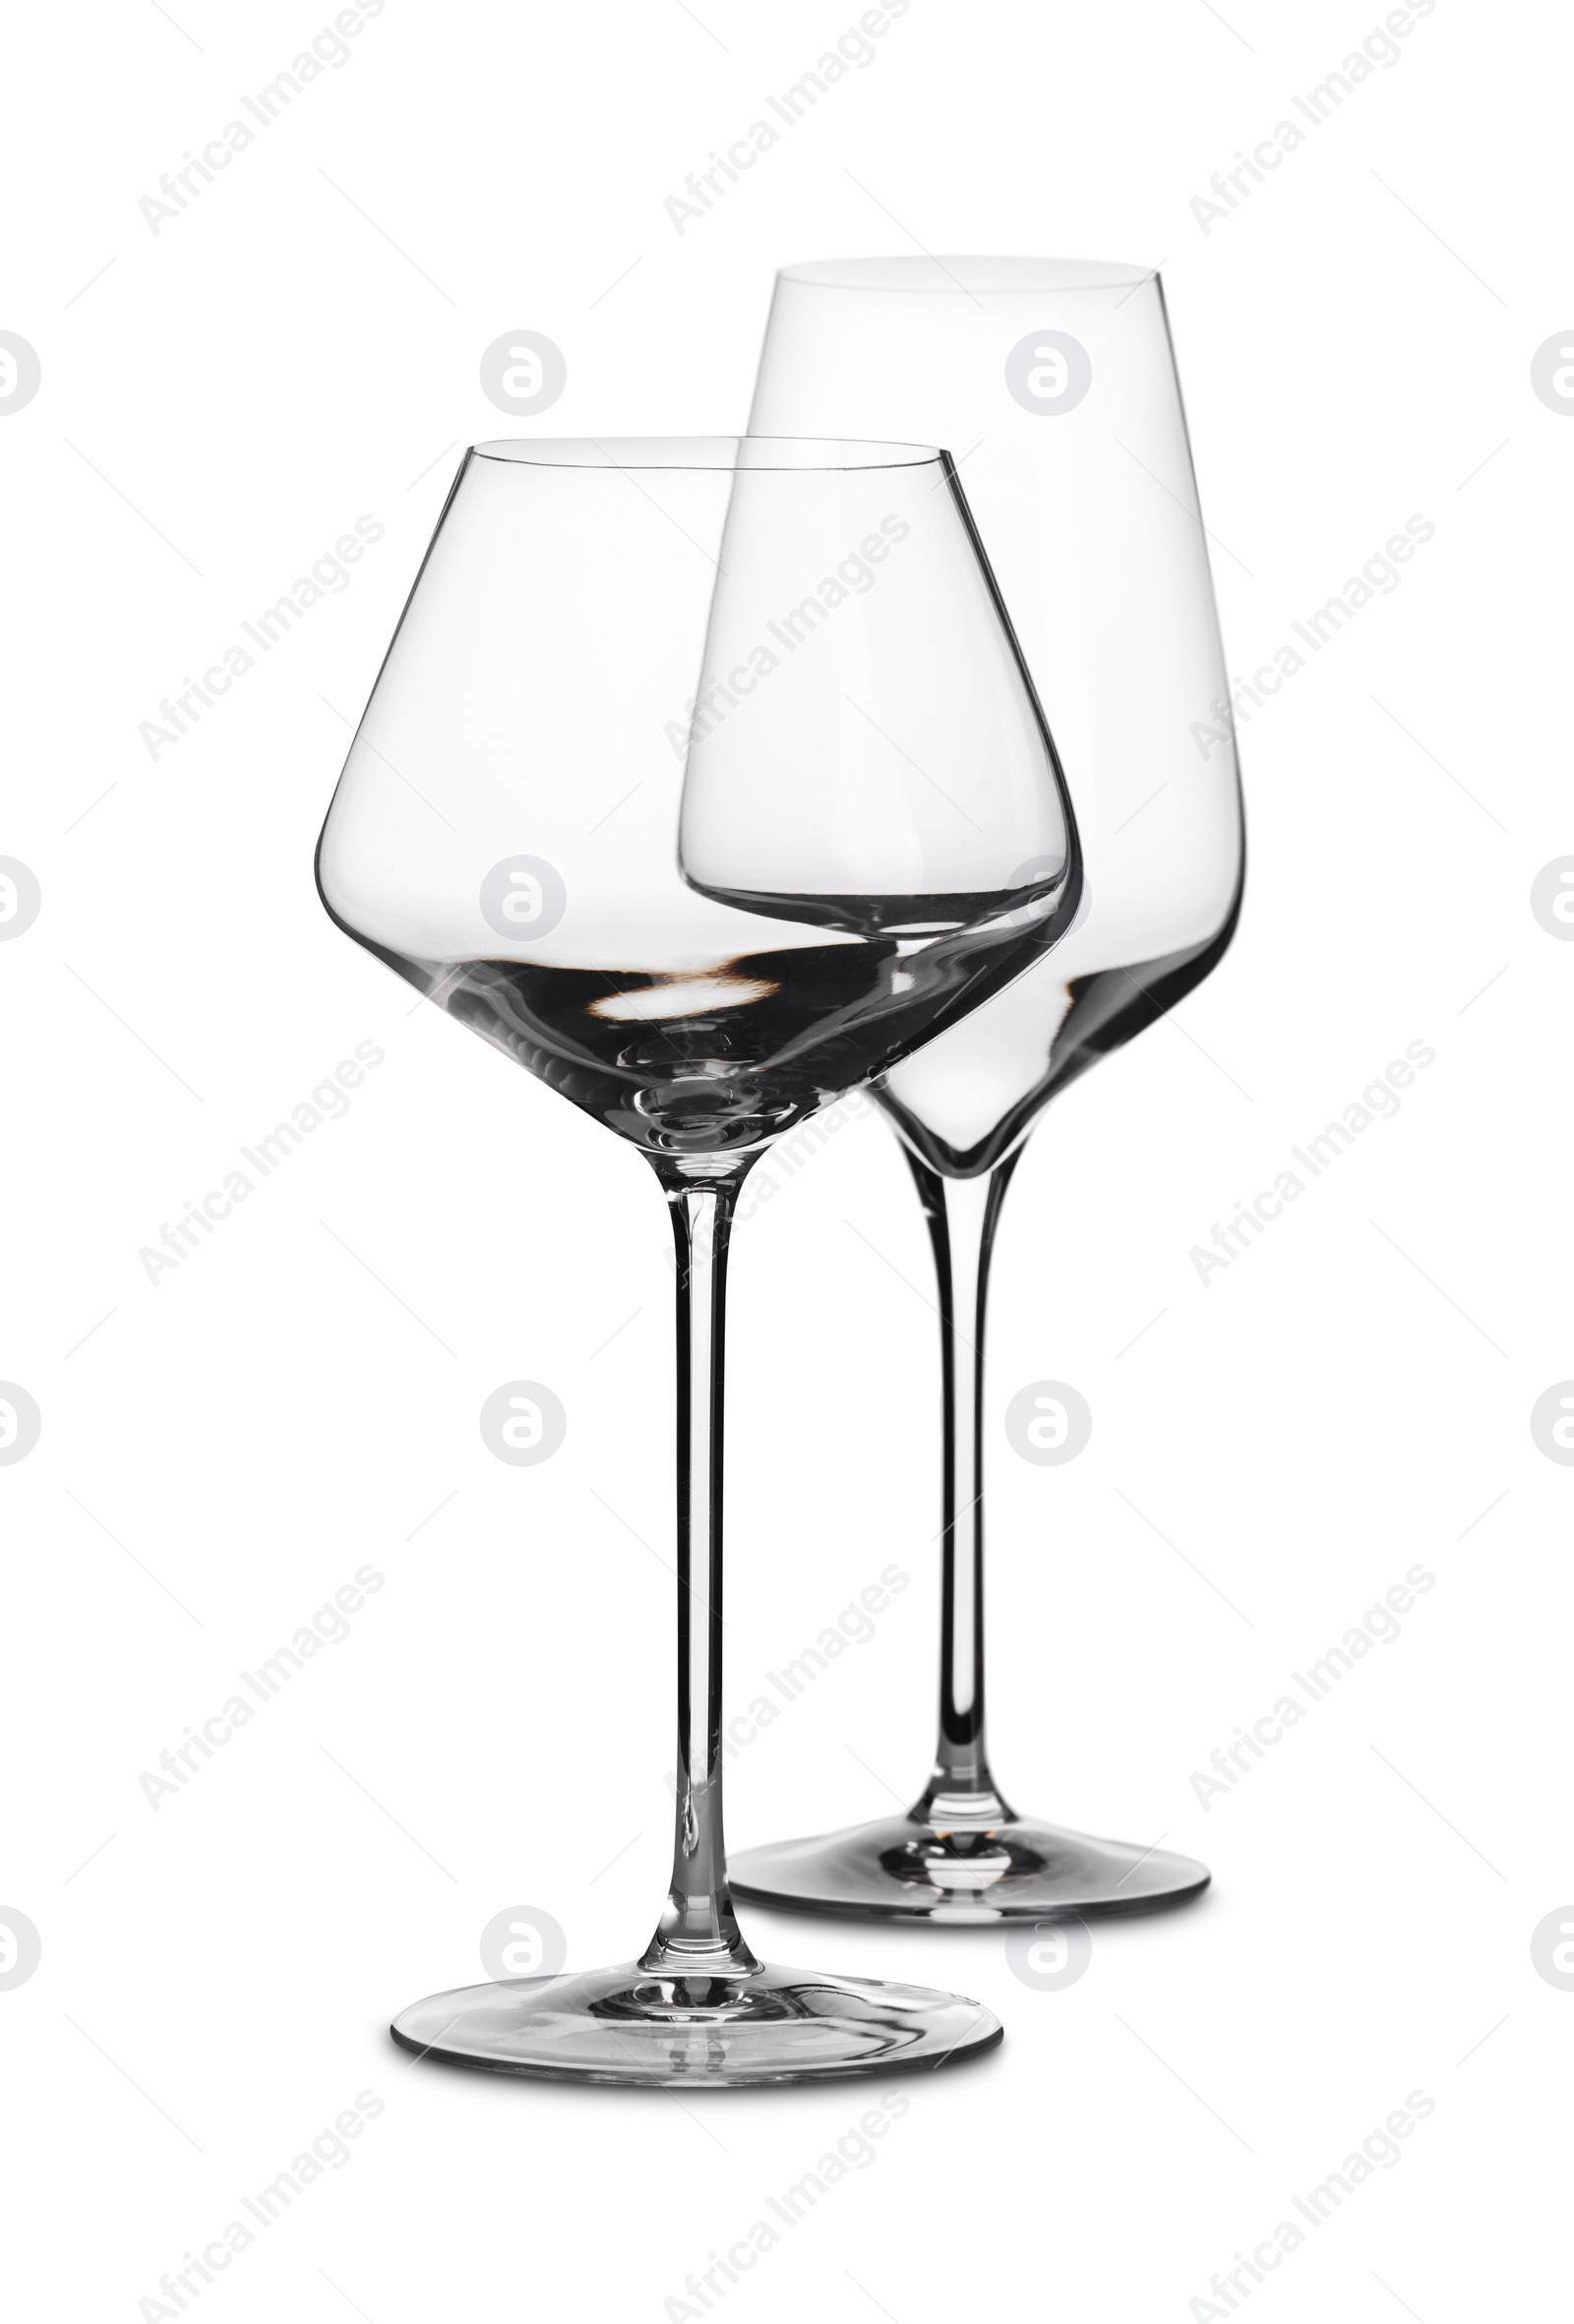 Photo of Two stylish clean glasses isolated on white